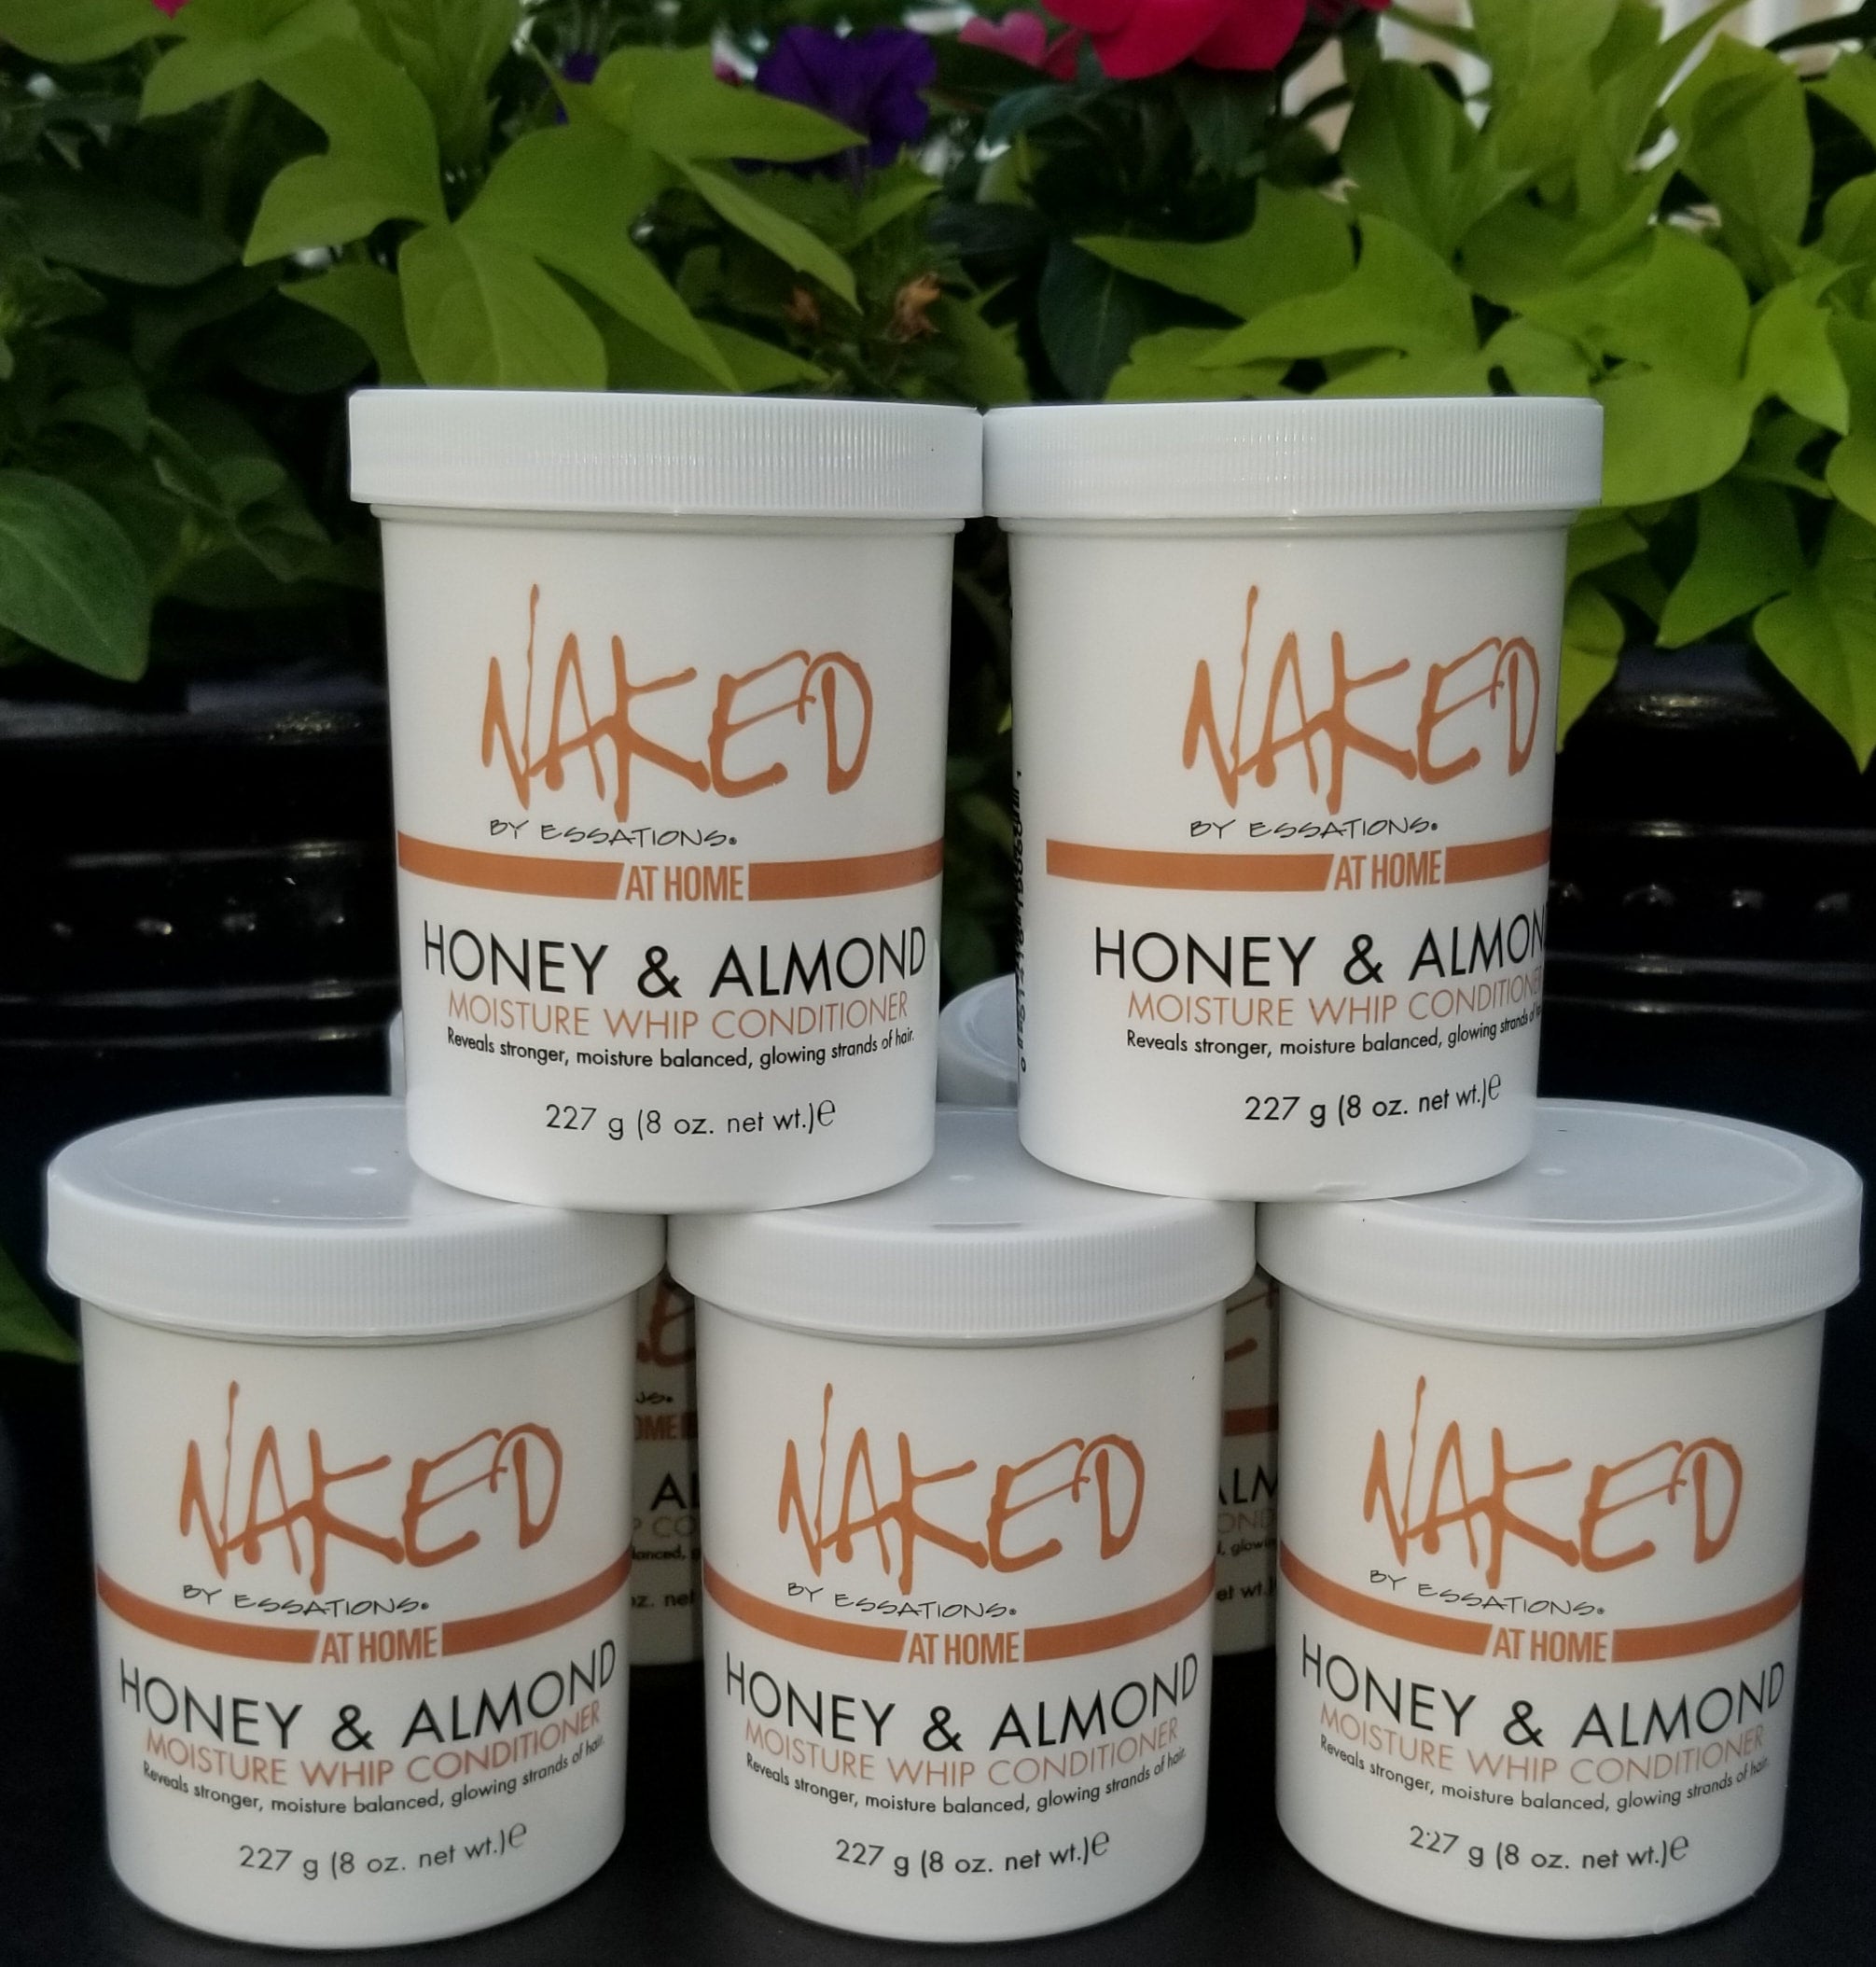 Naked By Essations Honey And Almond Moisture Whip Conditioner 8 Oz 